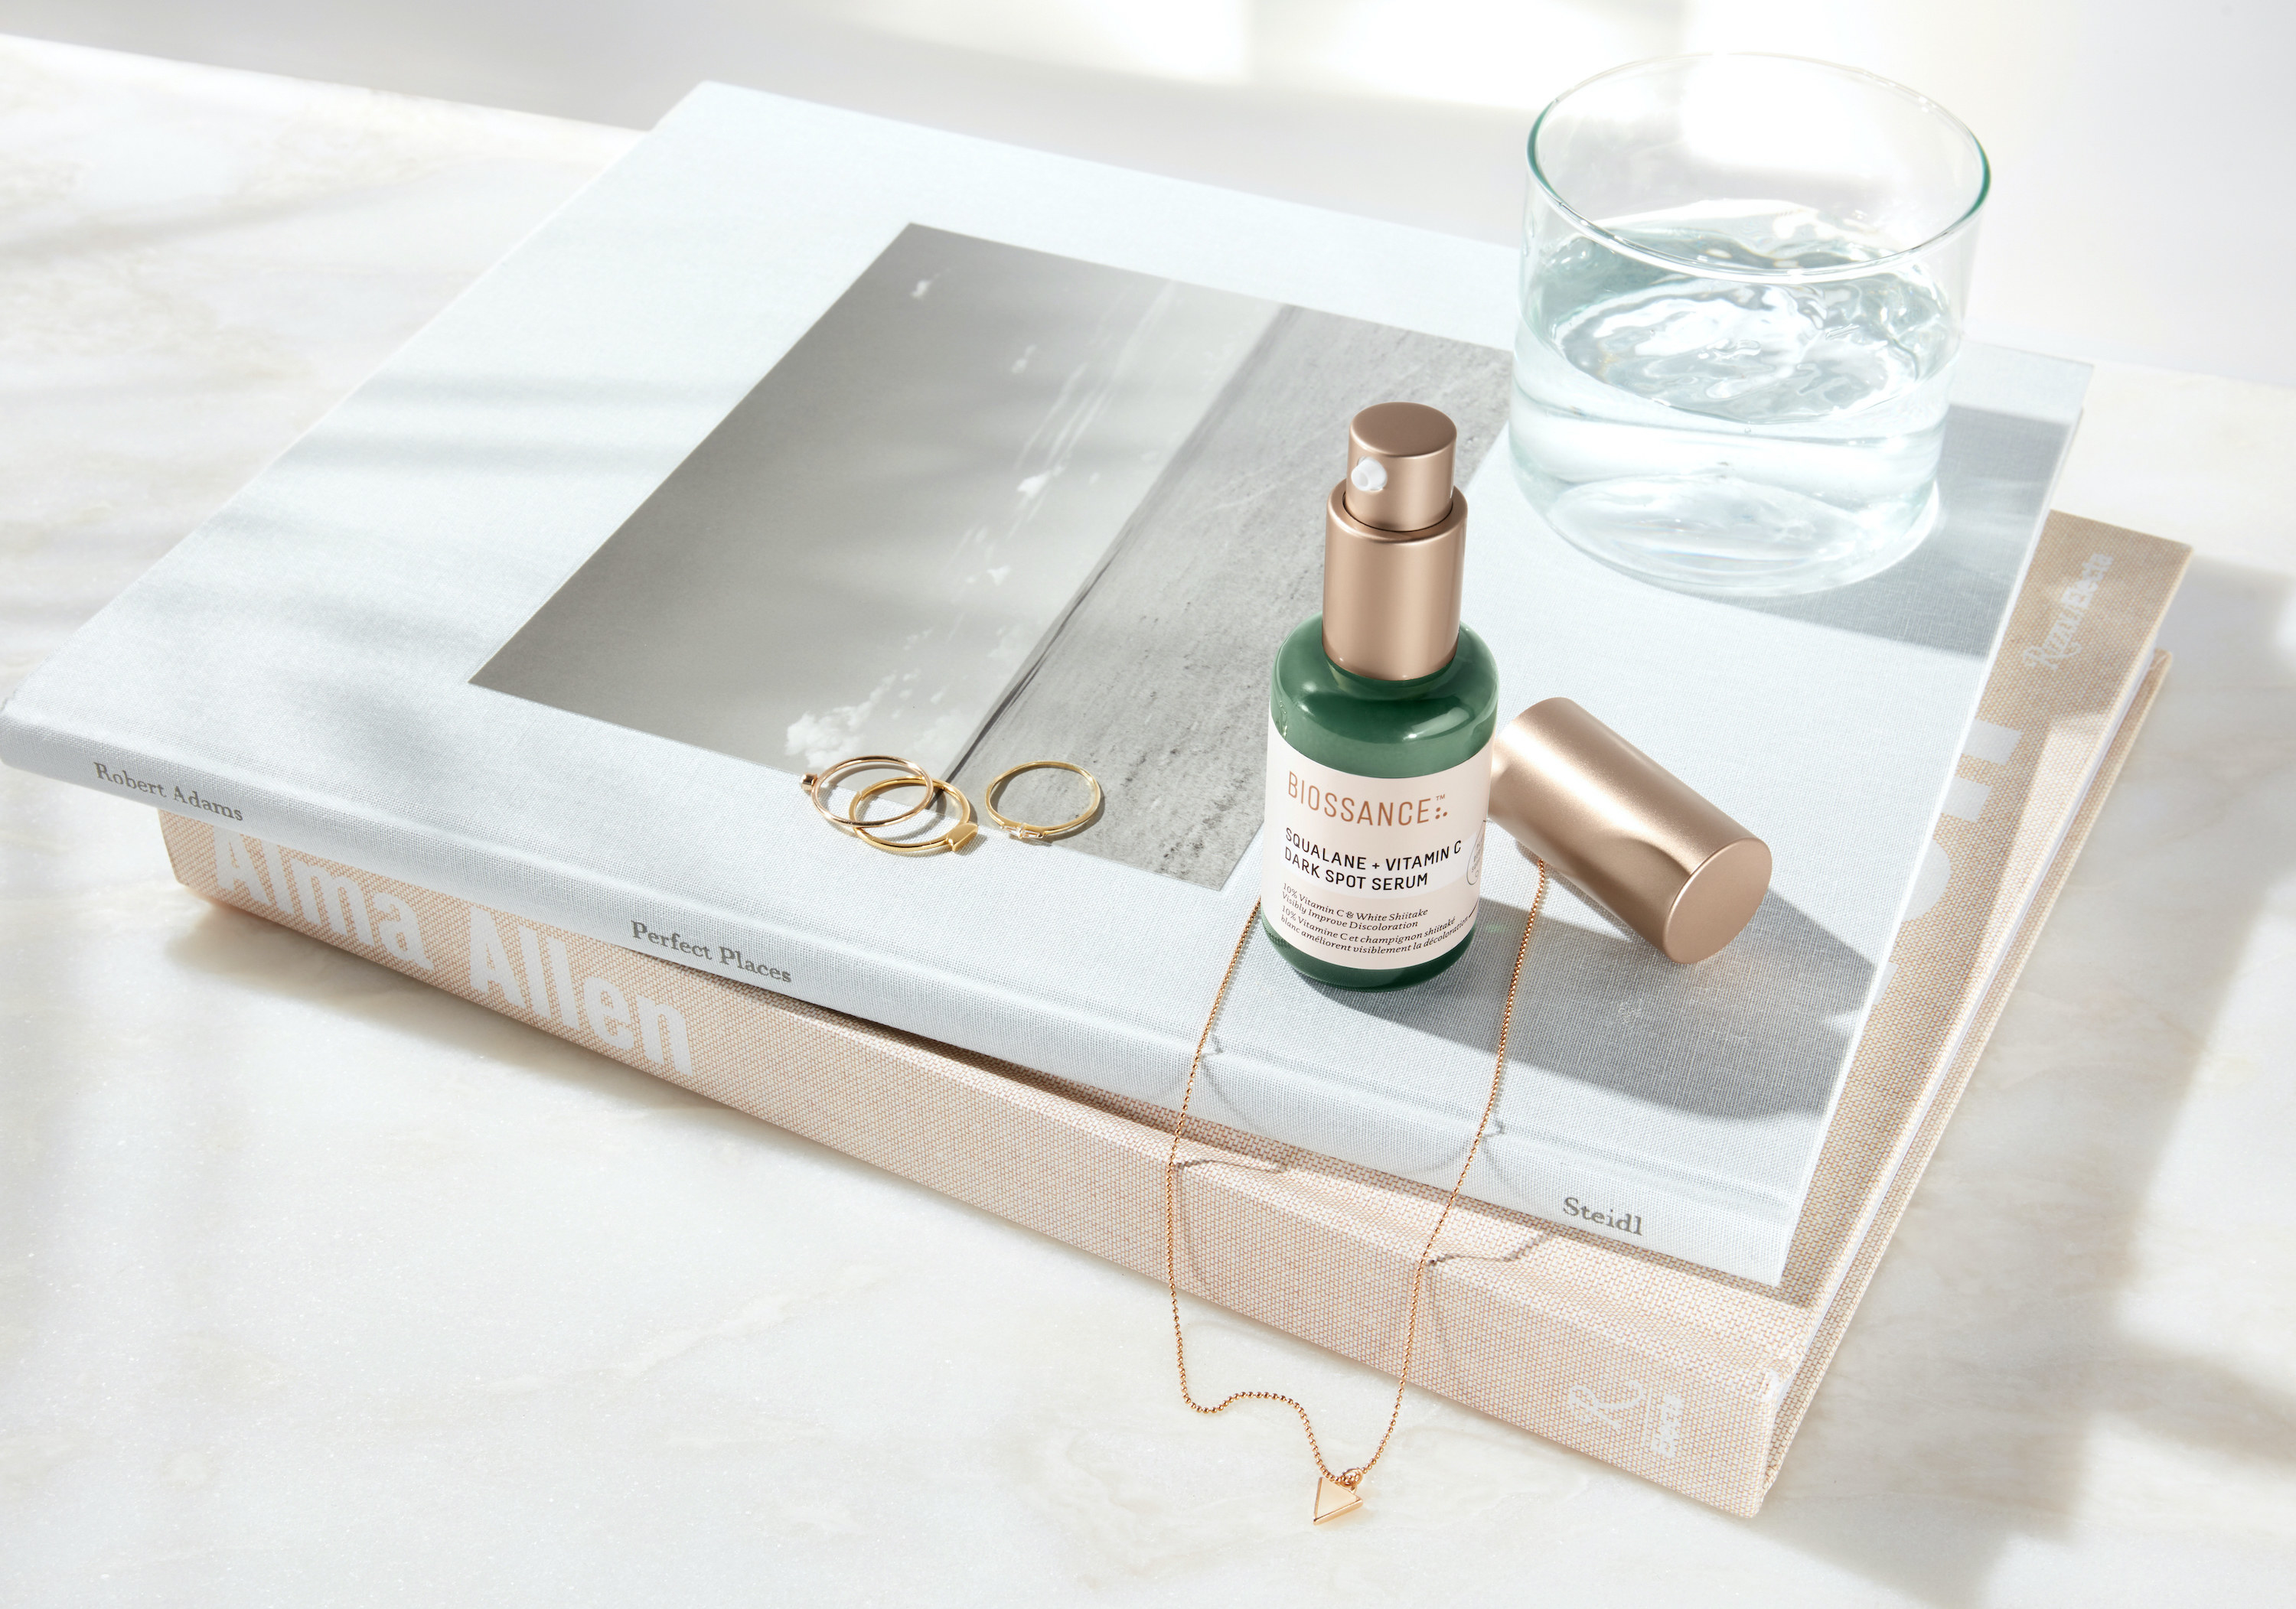 The Squalane and Vitamin C Dark Spot Serum in green bottle with a metallic pump top sitting on a stack of books next to a gold necklace and three rings 